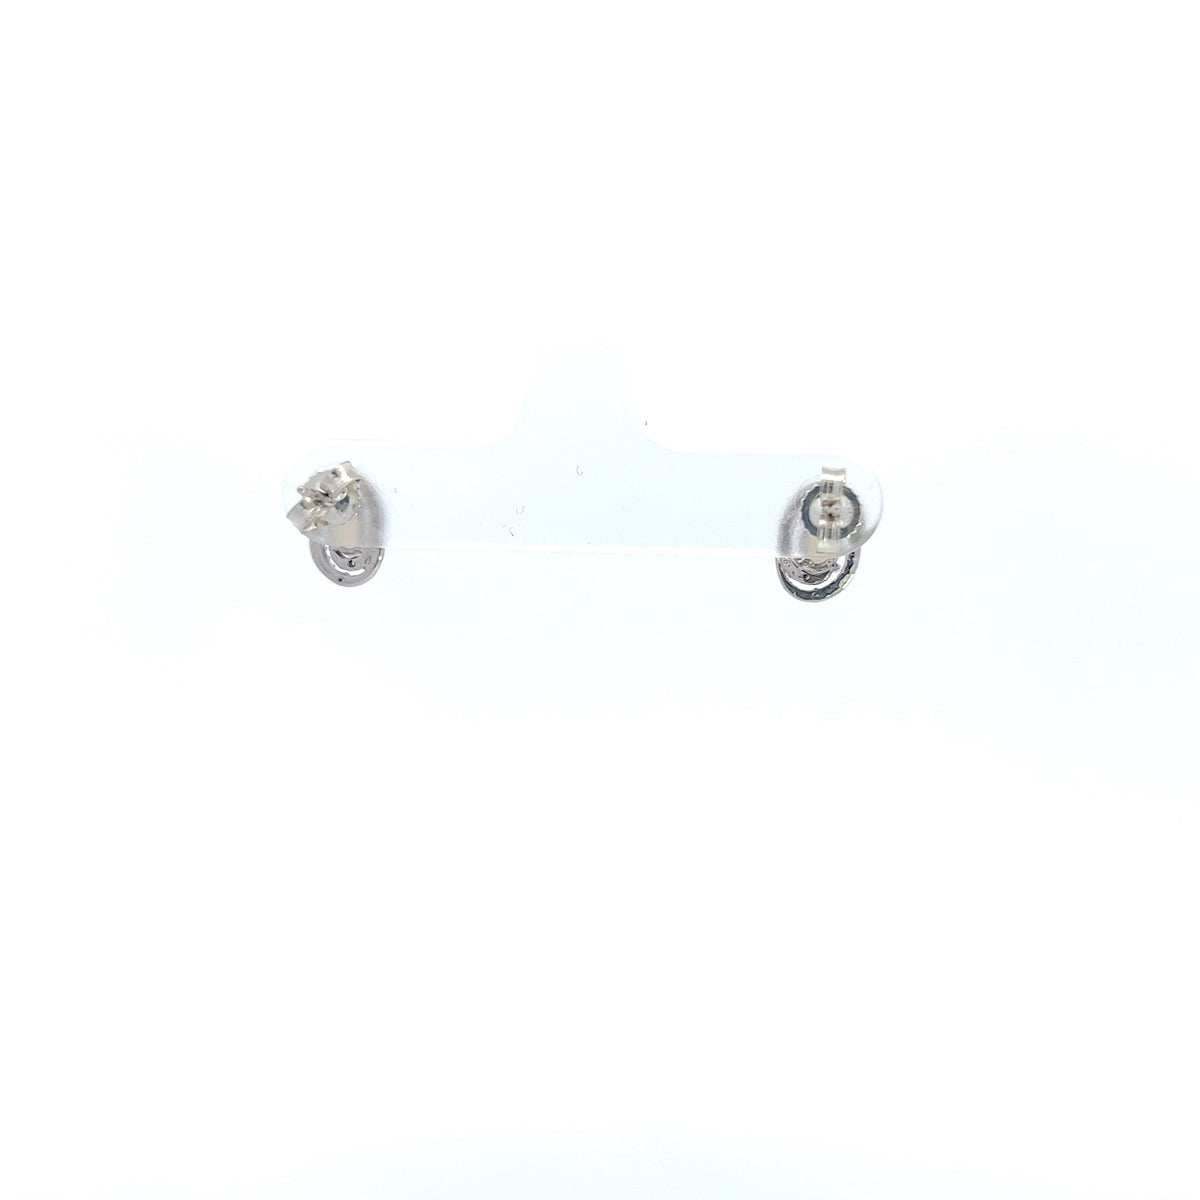 925 Sterling Silver 5 x 3mm Opal and 0.036cttw Diamond Stud Earrings with Butterfly Backs - 6mm x 9mm